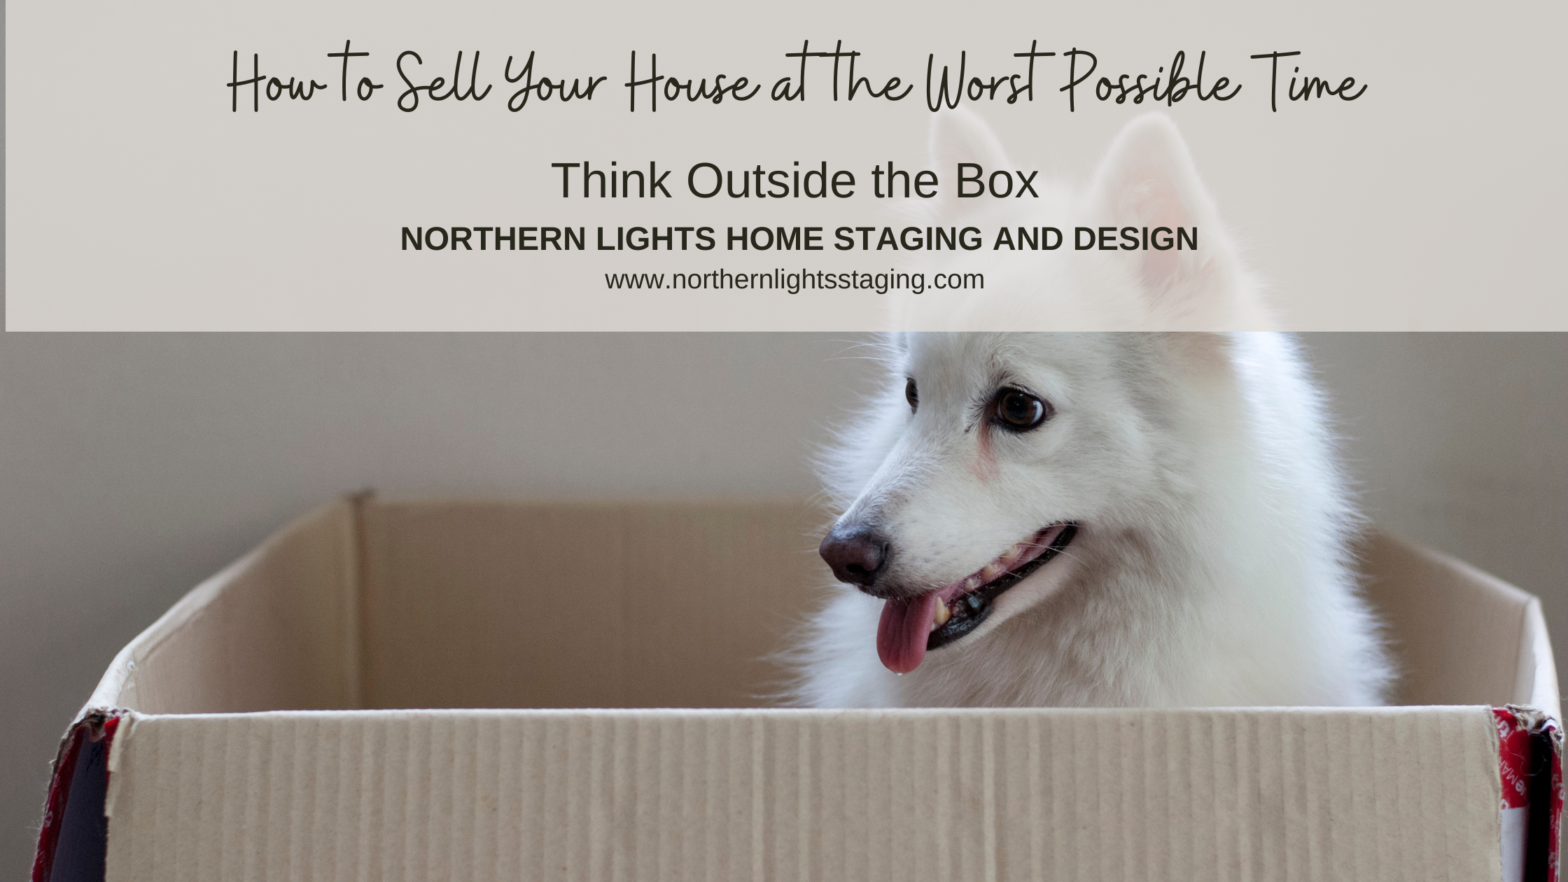 How to Sell Your House at the Worst Possible Time. Try a virtual home staging consultation or virtual staging. Northern Lights Home Staging and Design